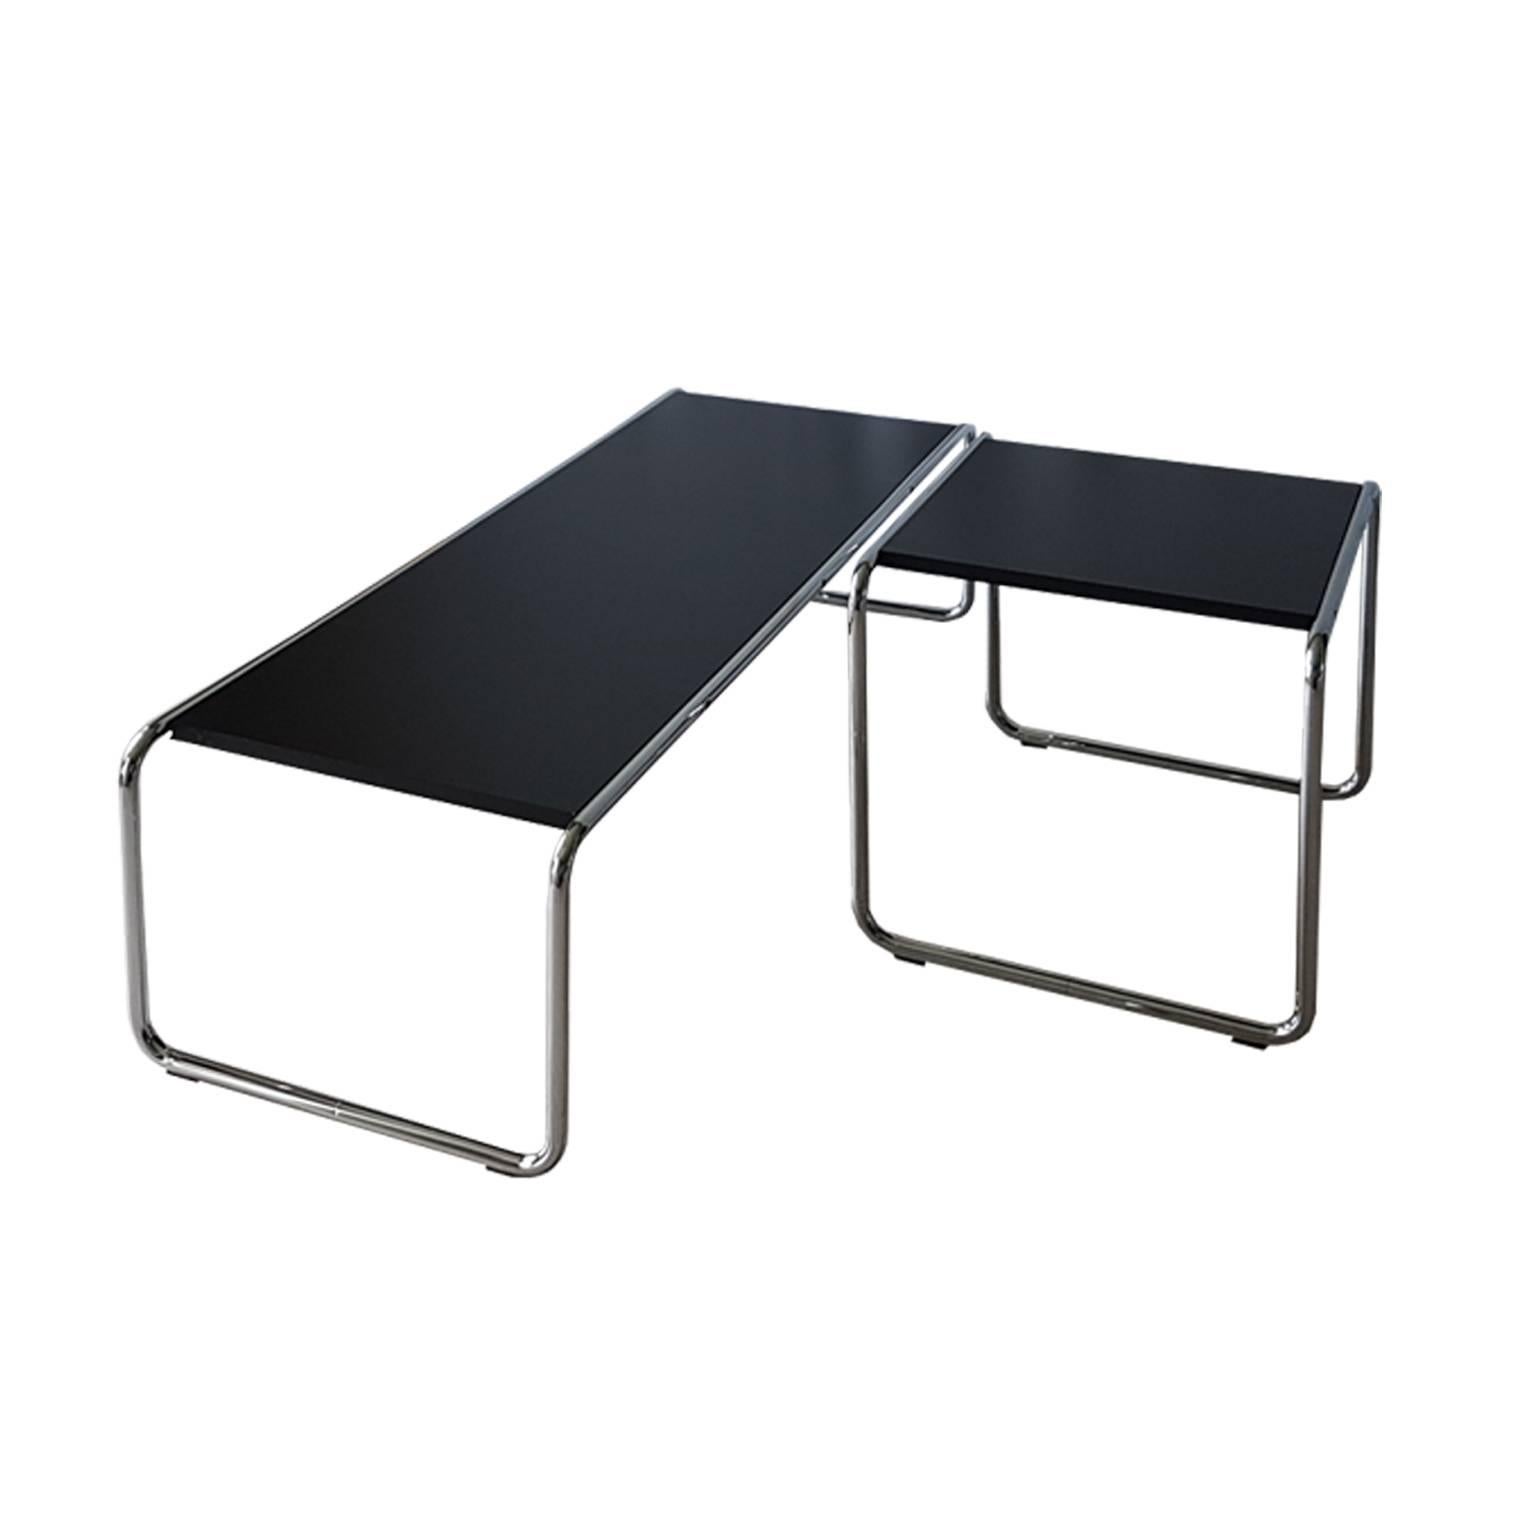 Marcel Breuer Coffee Table in Tubular Steel and Black Laminate Top Bauhaus style 1